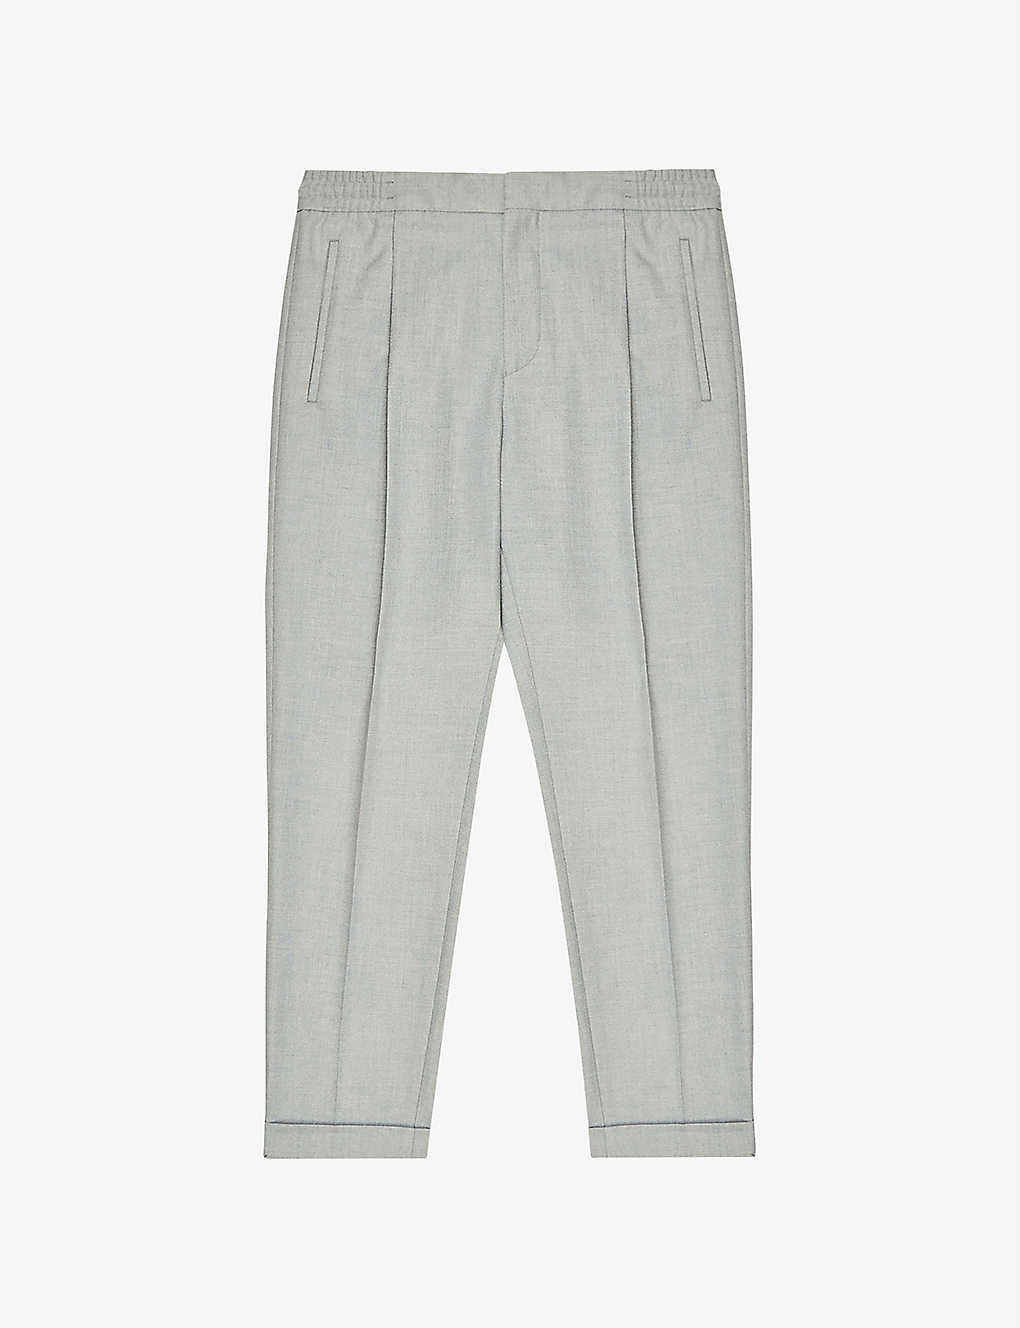 Shop Reiss Men's Soft Grey Brighton Pleated Slim-fit Tapered Stretch-woven Trousers